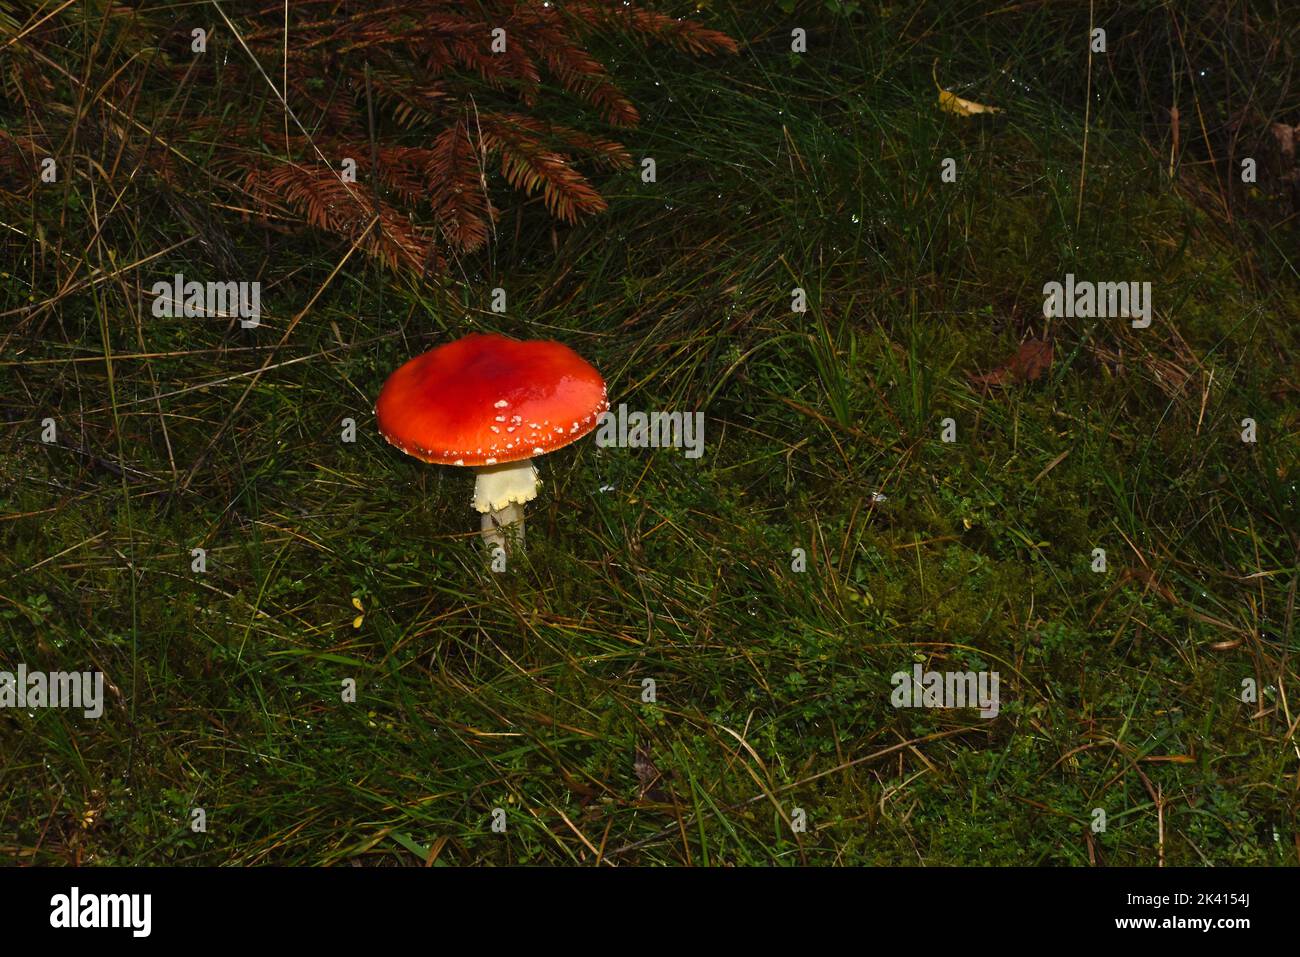 stand alone picture of a fly mushroom Amanita muscaria on green gras in the nature of germany Stock Photo